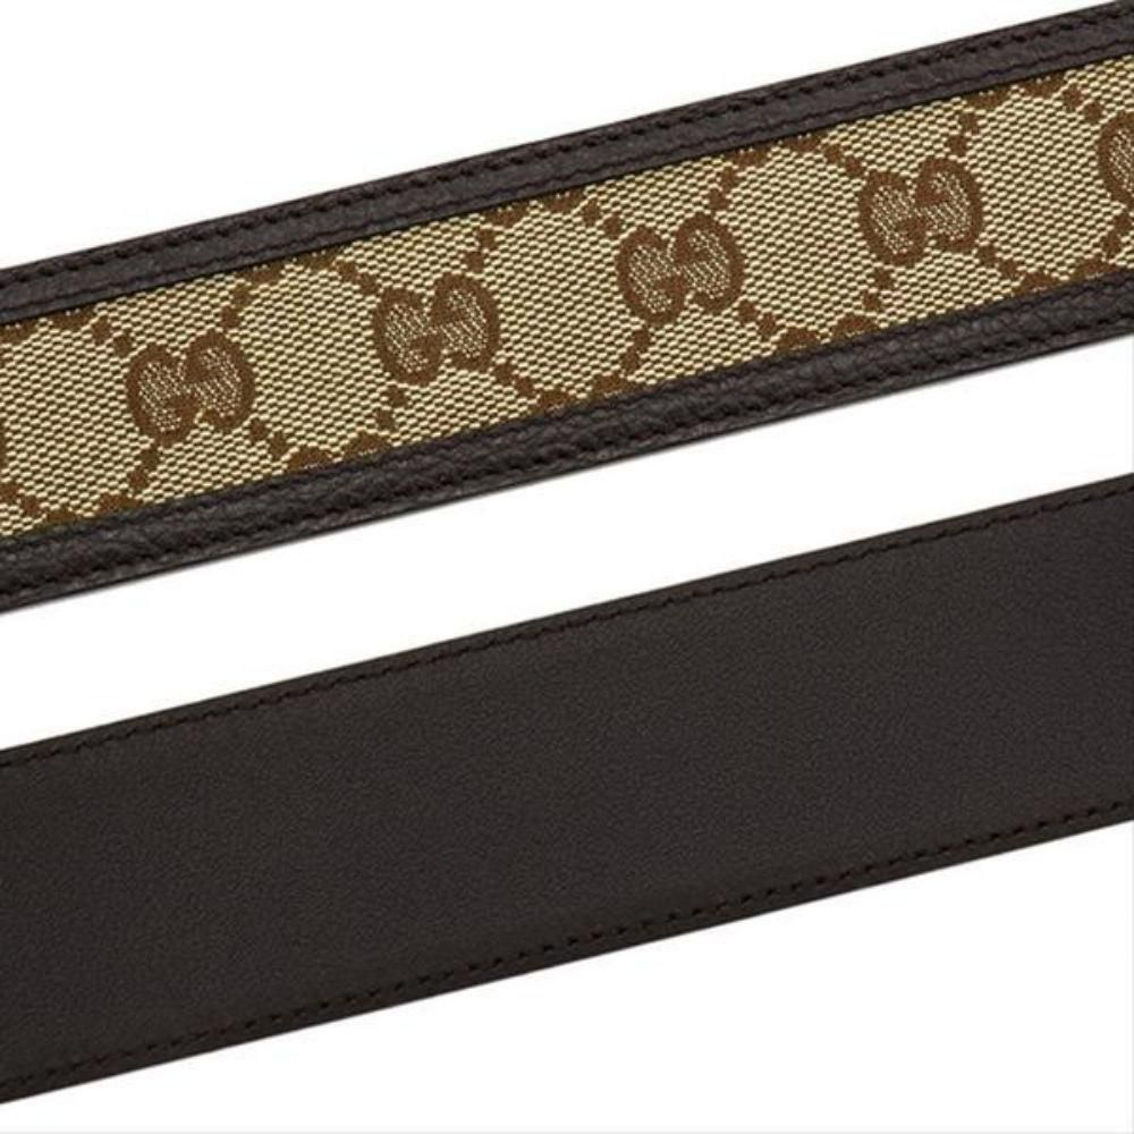 Gucci GG Brown and Beige Canvas Leather Trim Belt Size 36/90 - Image 5 of 5